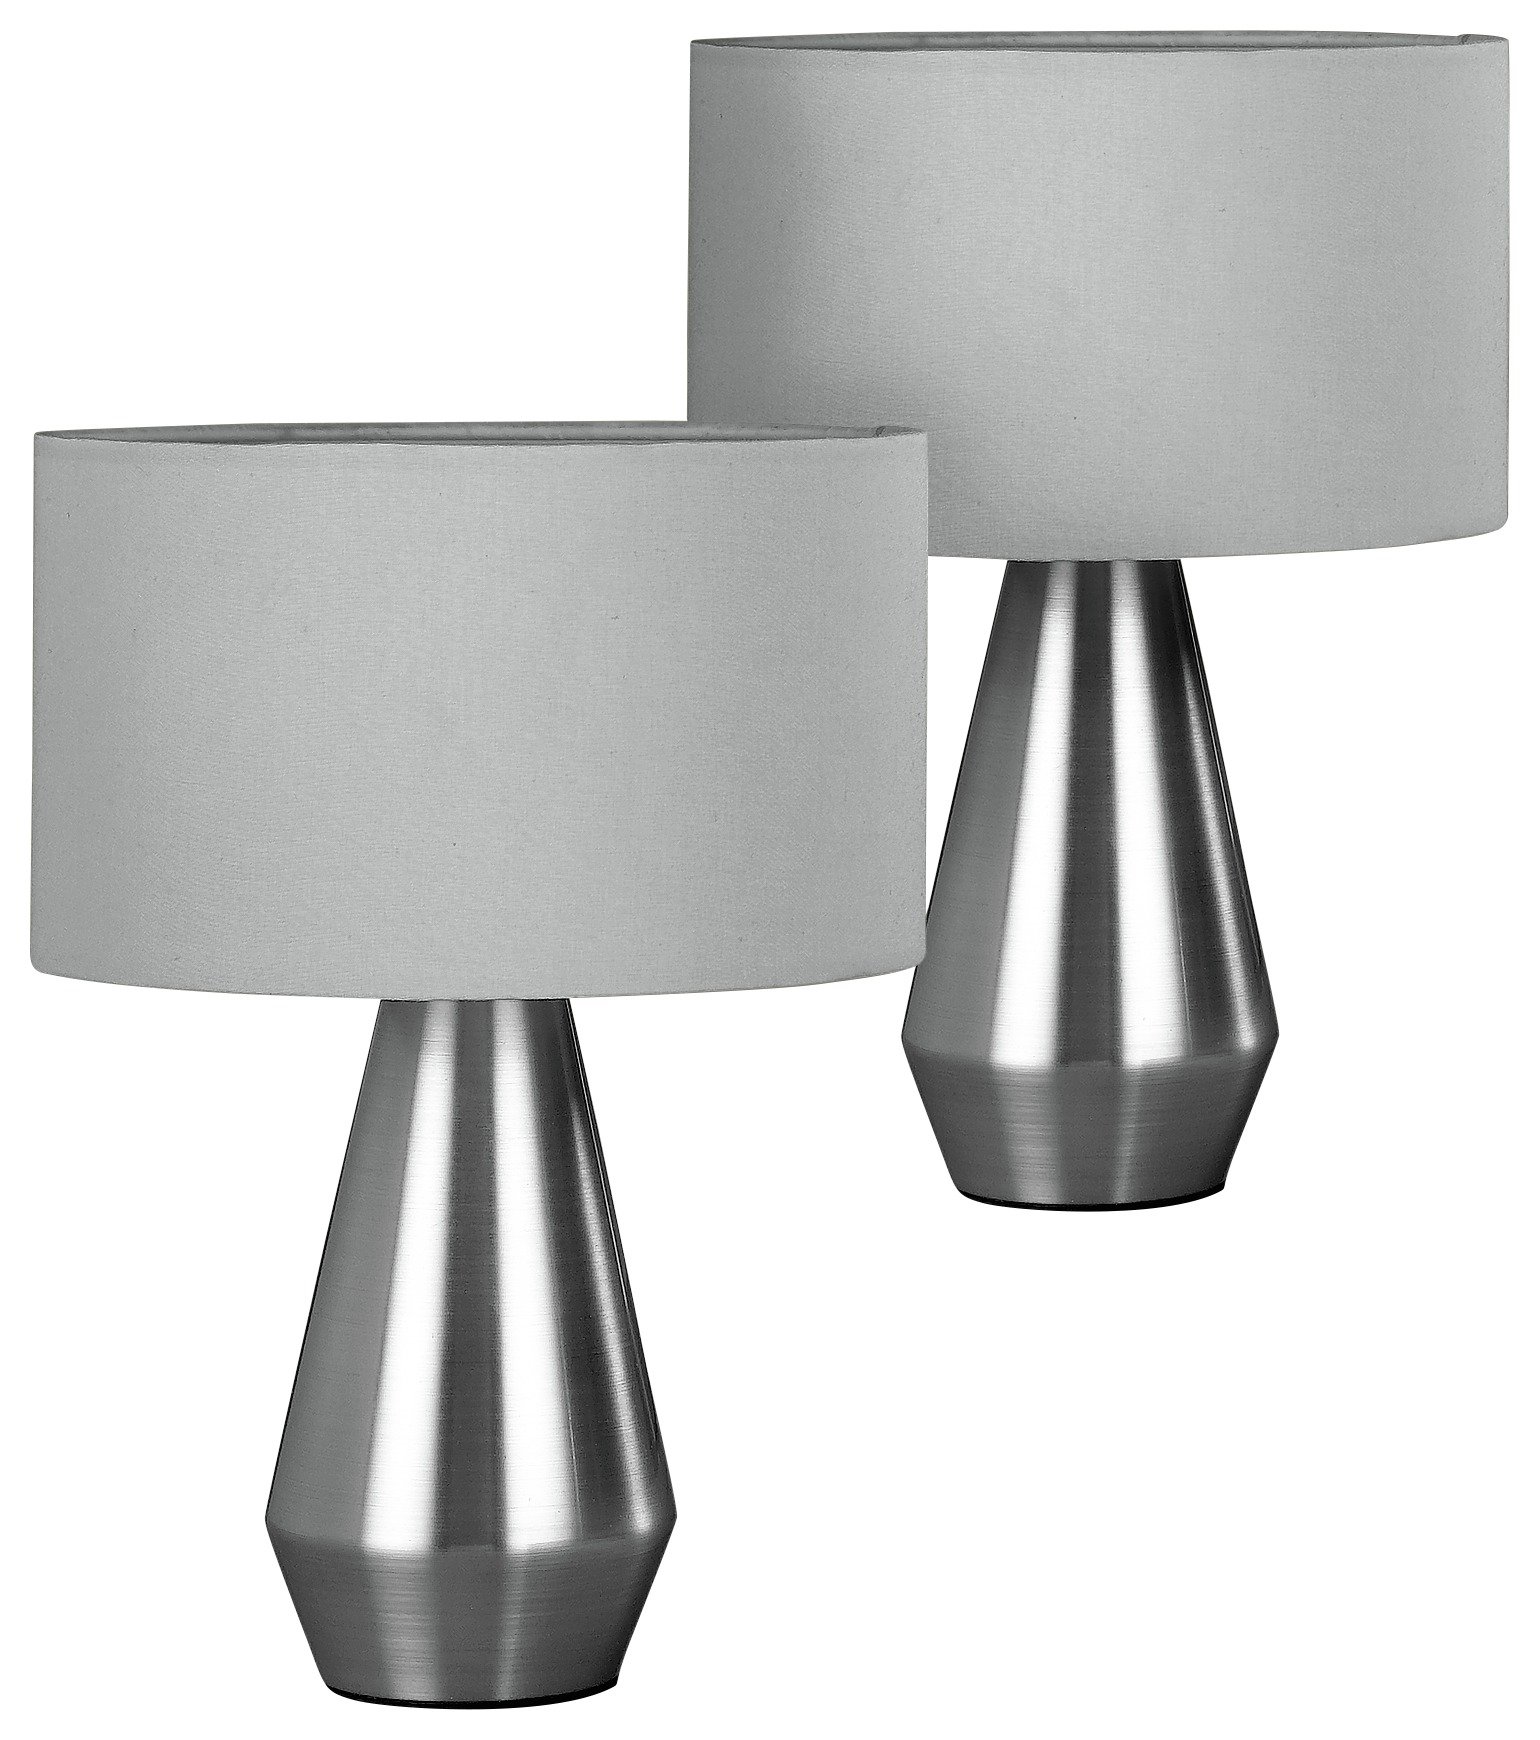 pair of grey table lamps